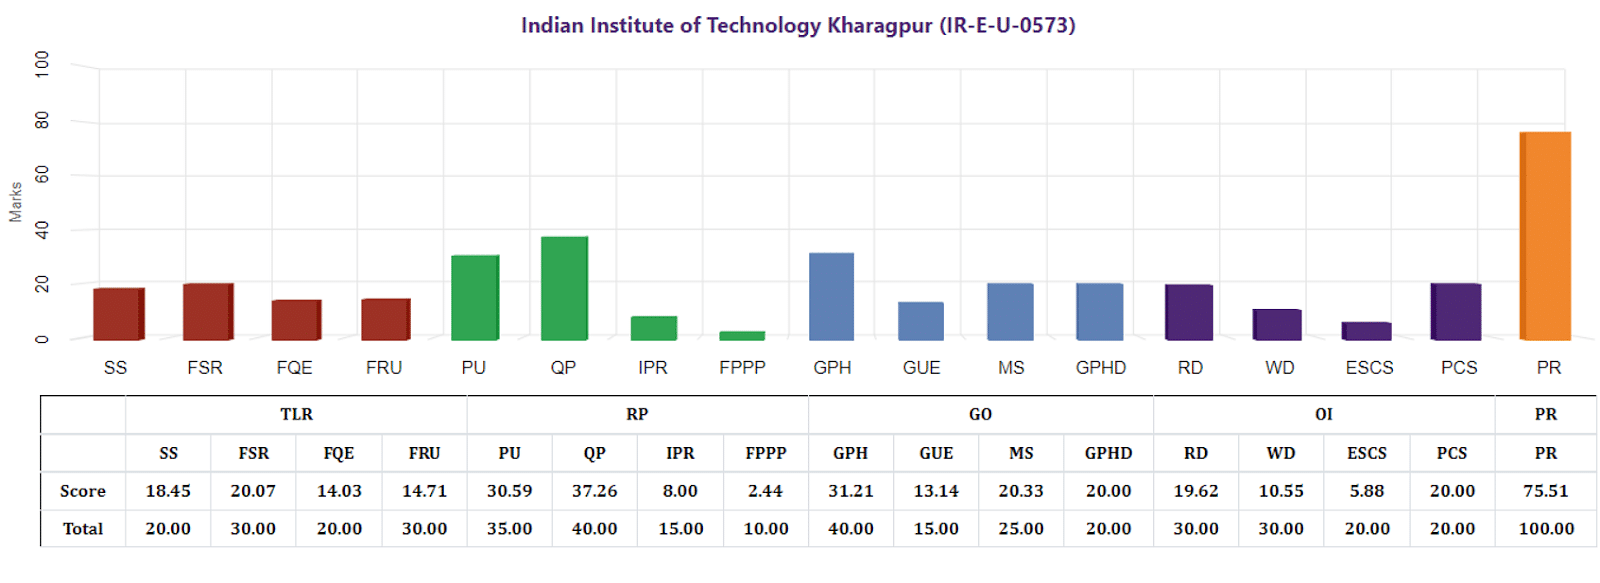 Check the graphical representation data of the IIT Kharagpur NIRF Engineering rankings: